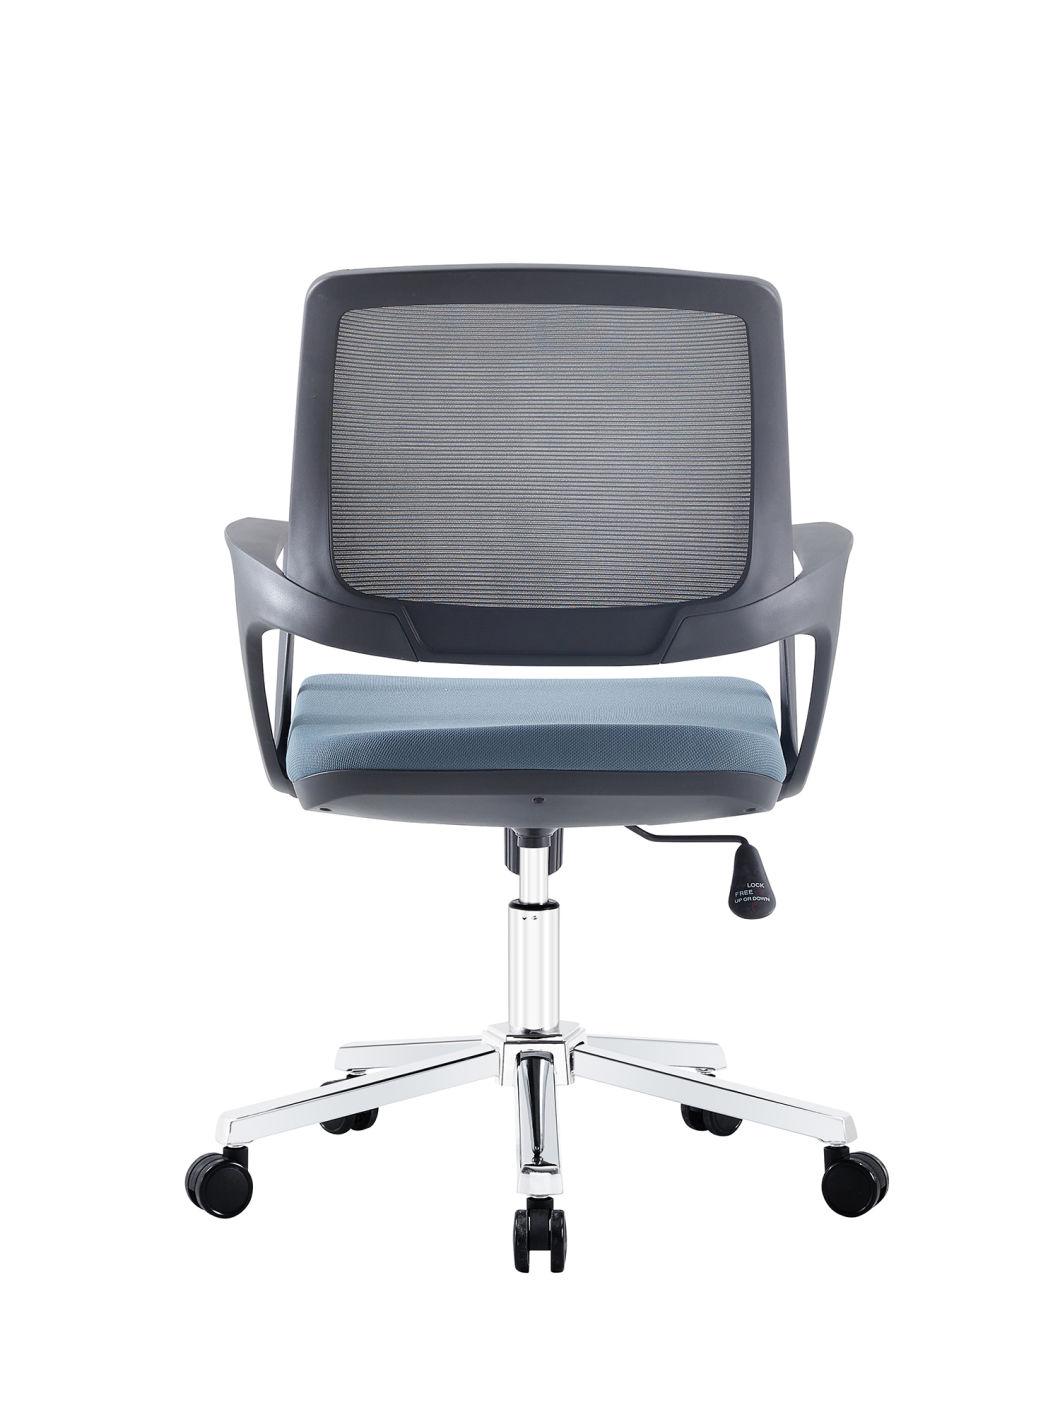 Elegant Small Size Office Staff Mesh Chair with Chrome Steel Base